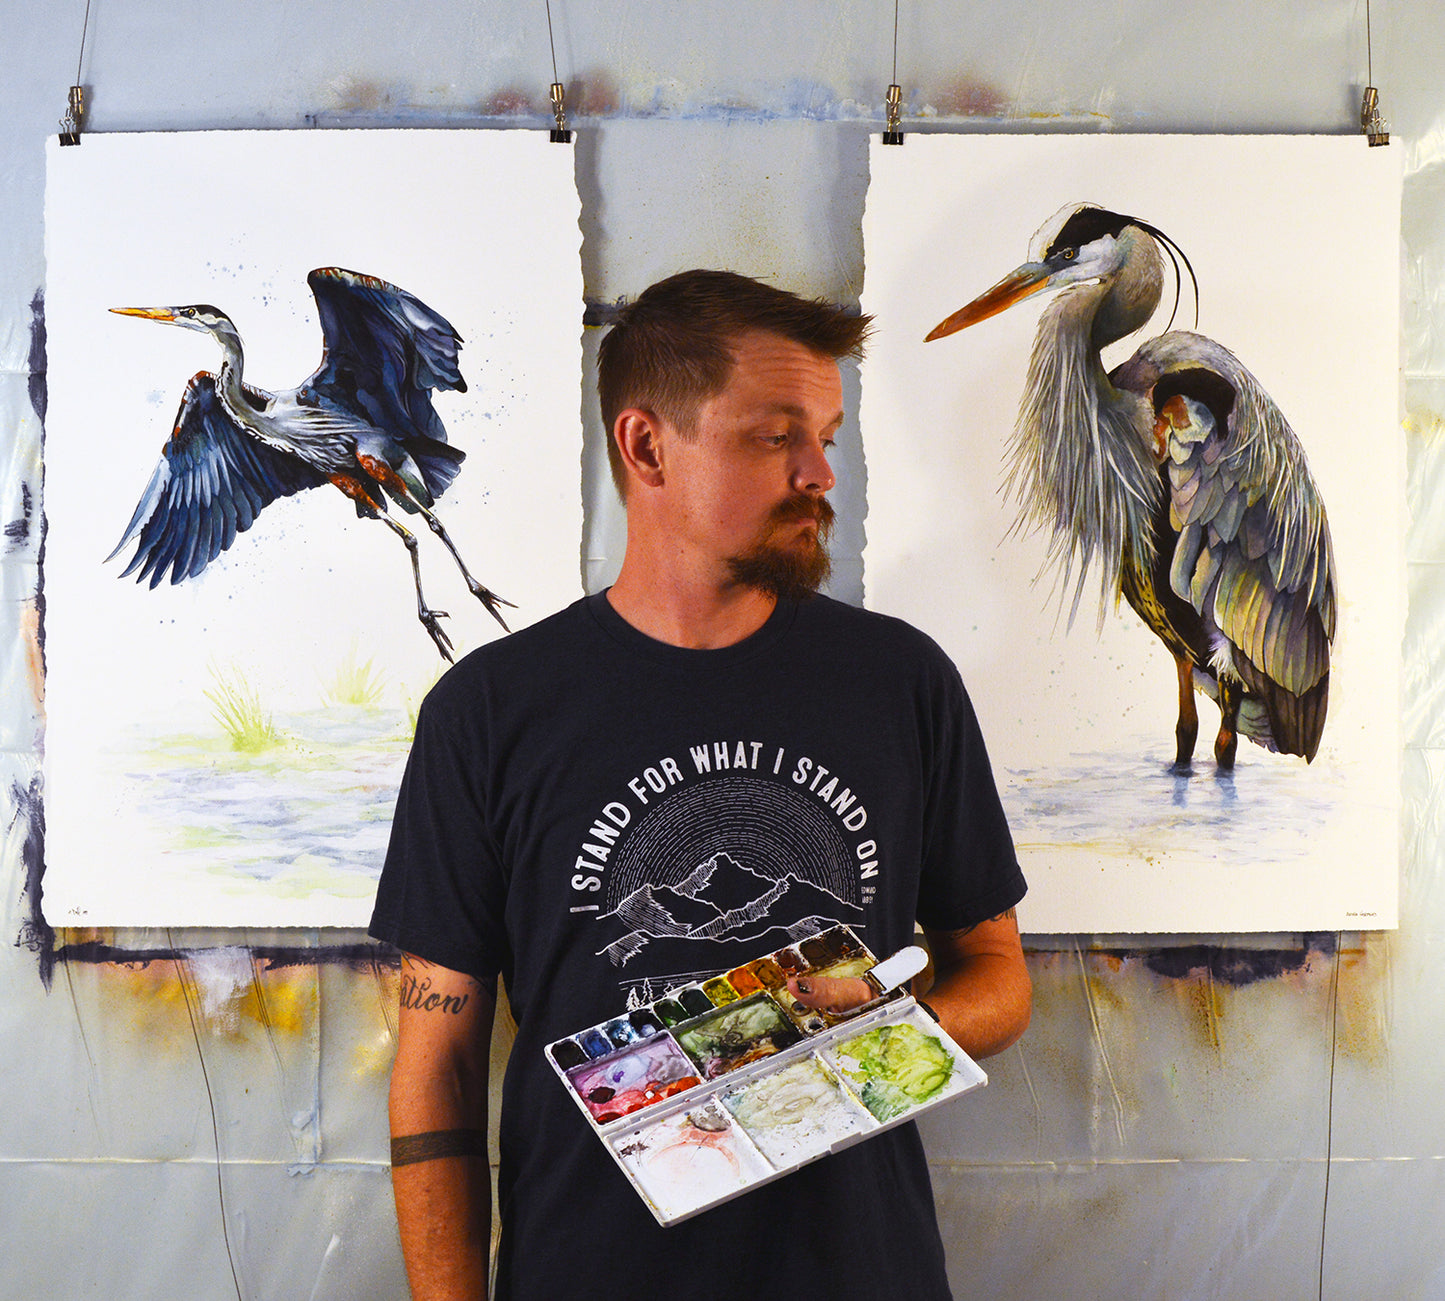 Watercolor Class - Step by Step - Paint Your Own Great Blue Heron - May 4th, 4-7p